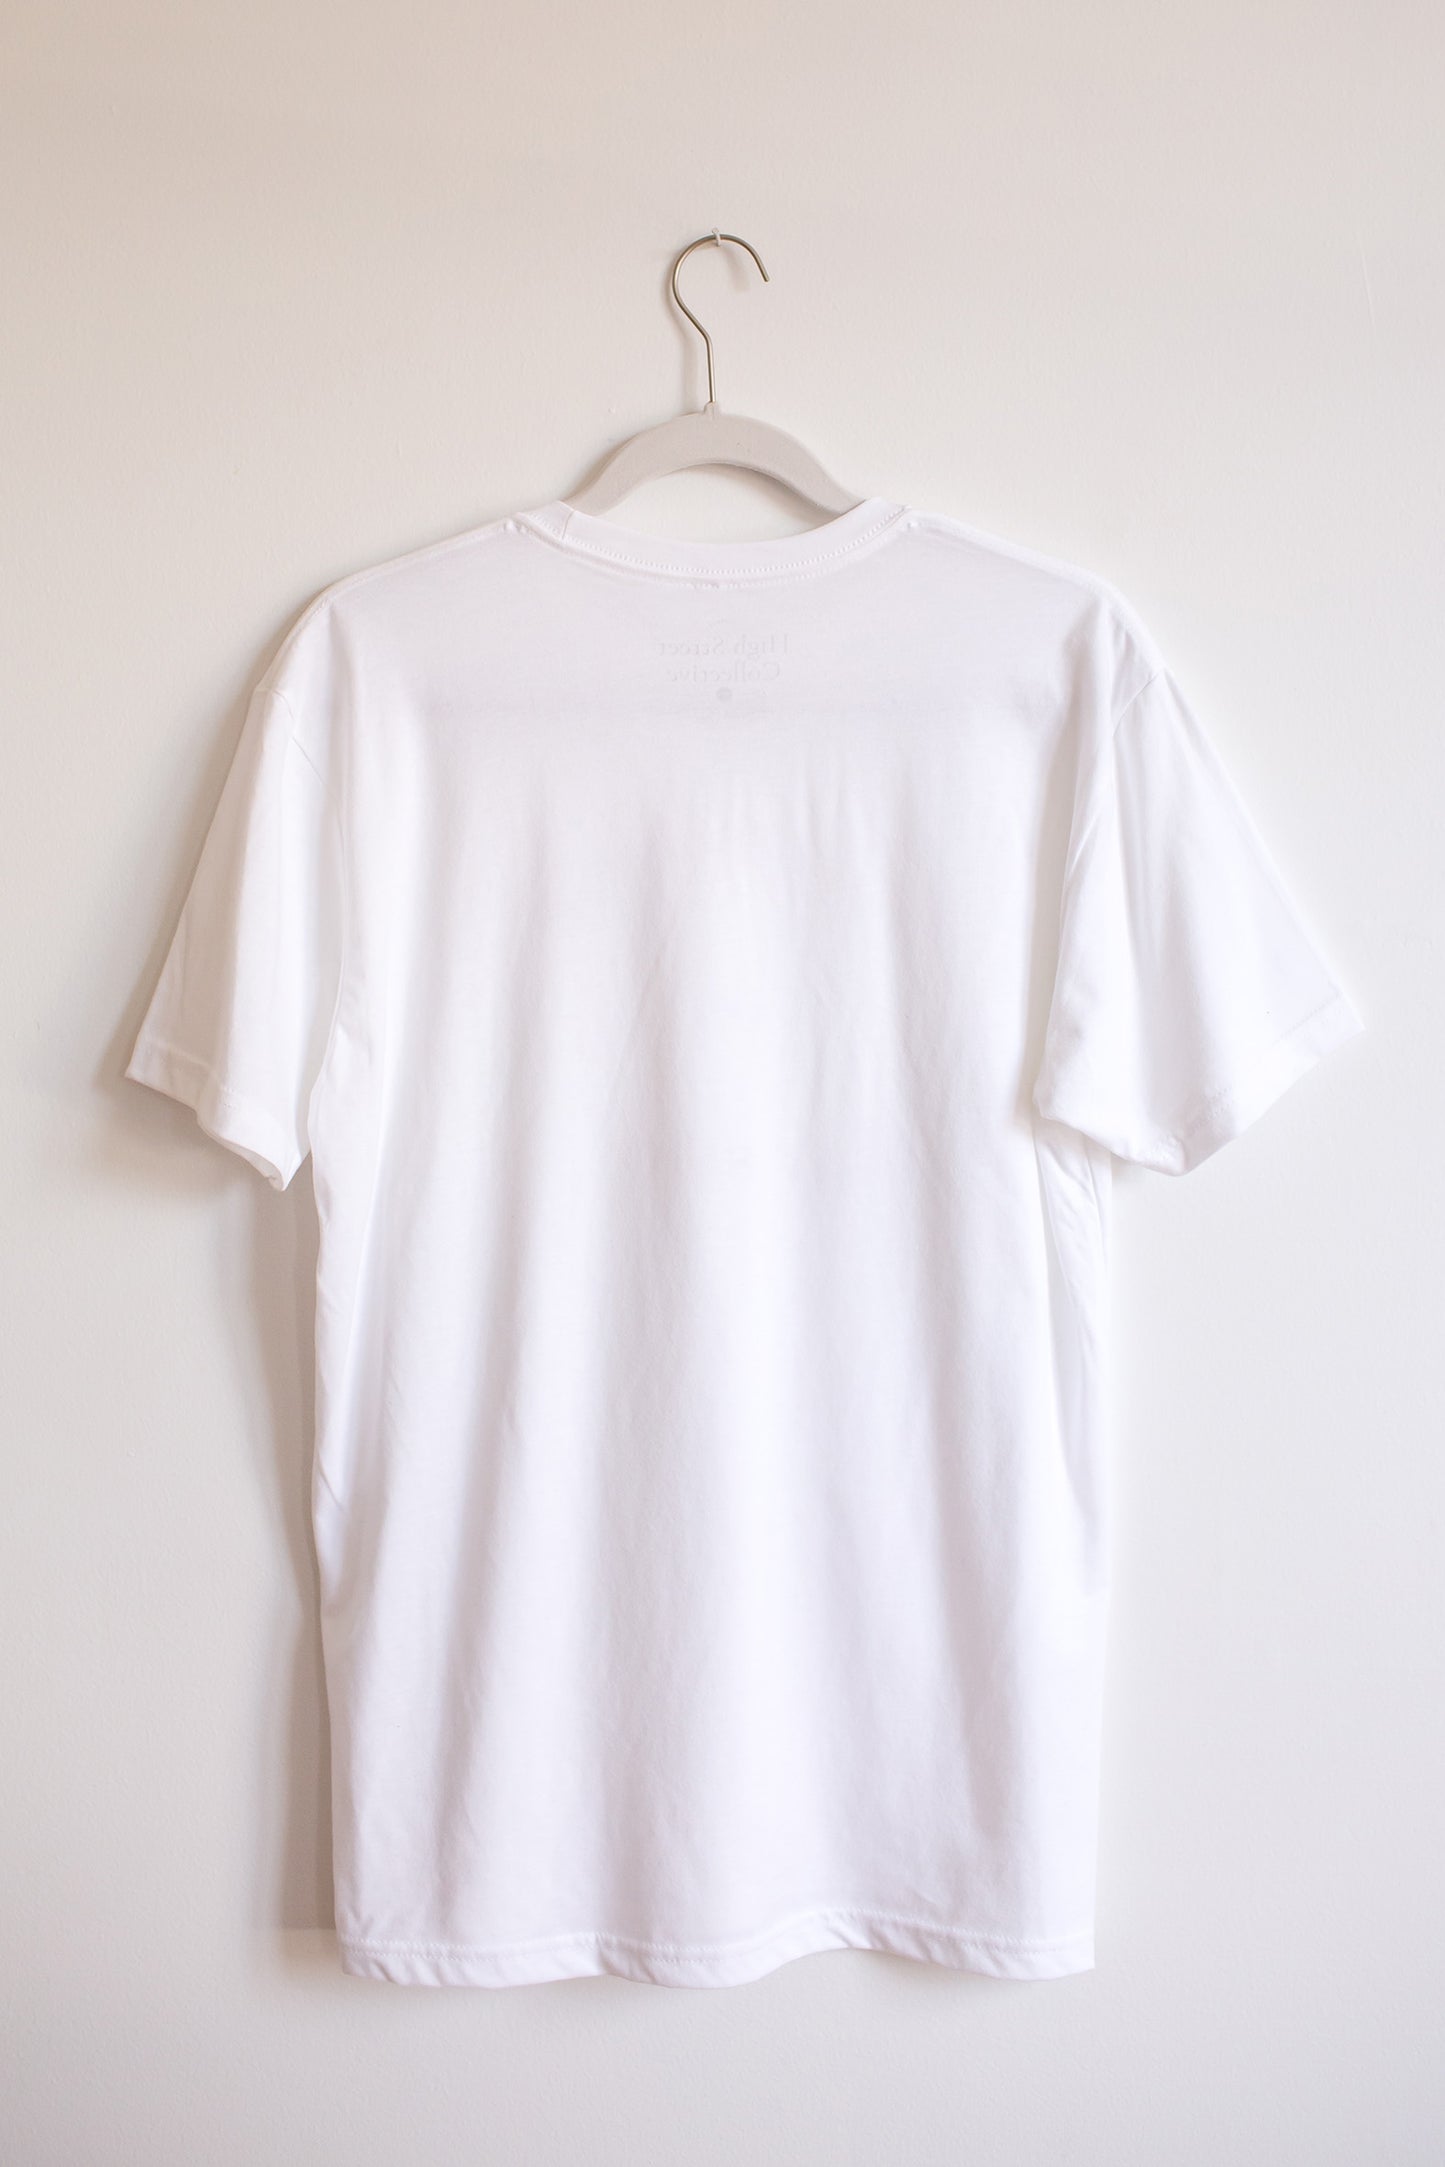 Back of hanging white sueded crewneck tee